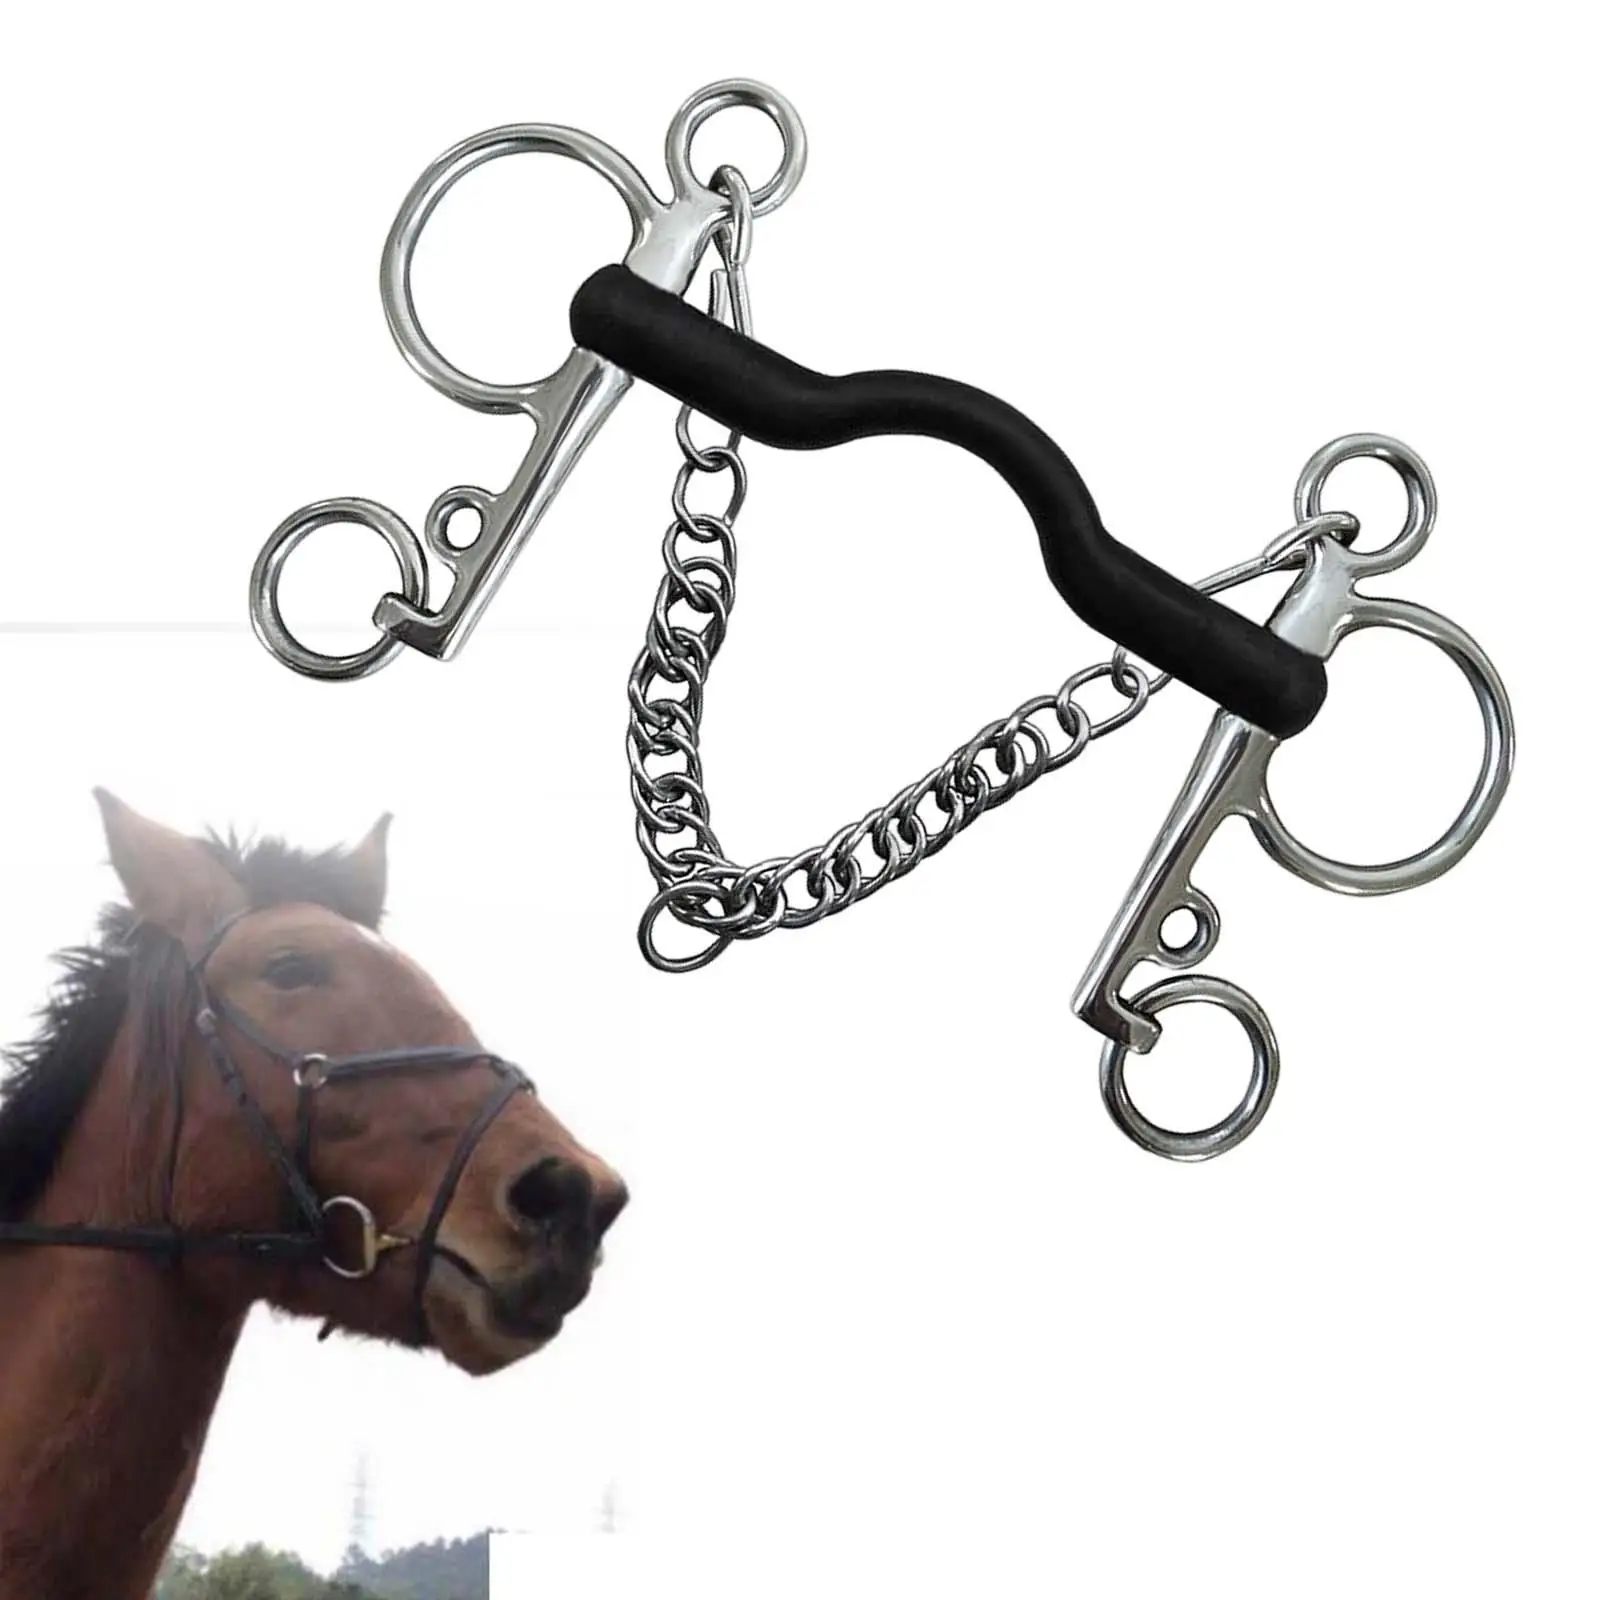 Horse Bit, with Fittings, Stainless Steel, Harness, for